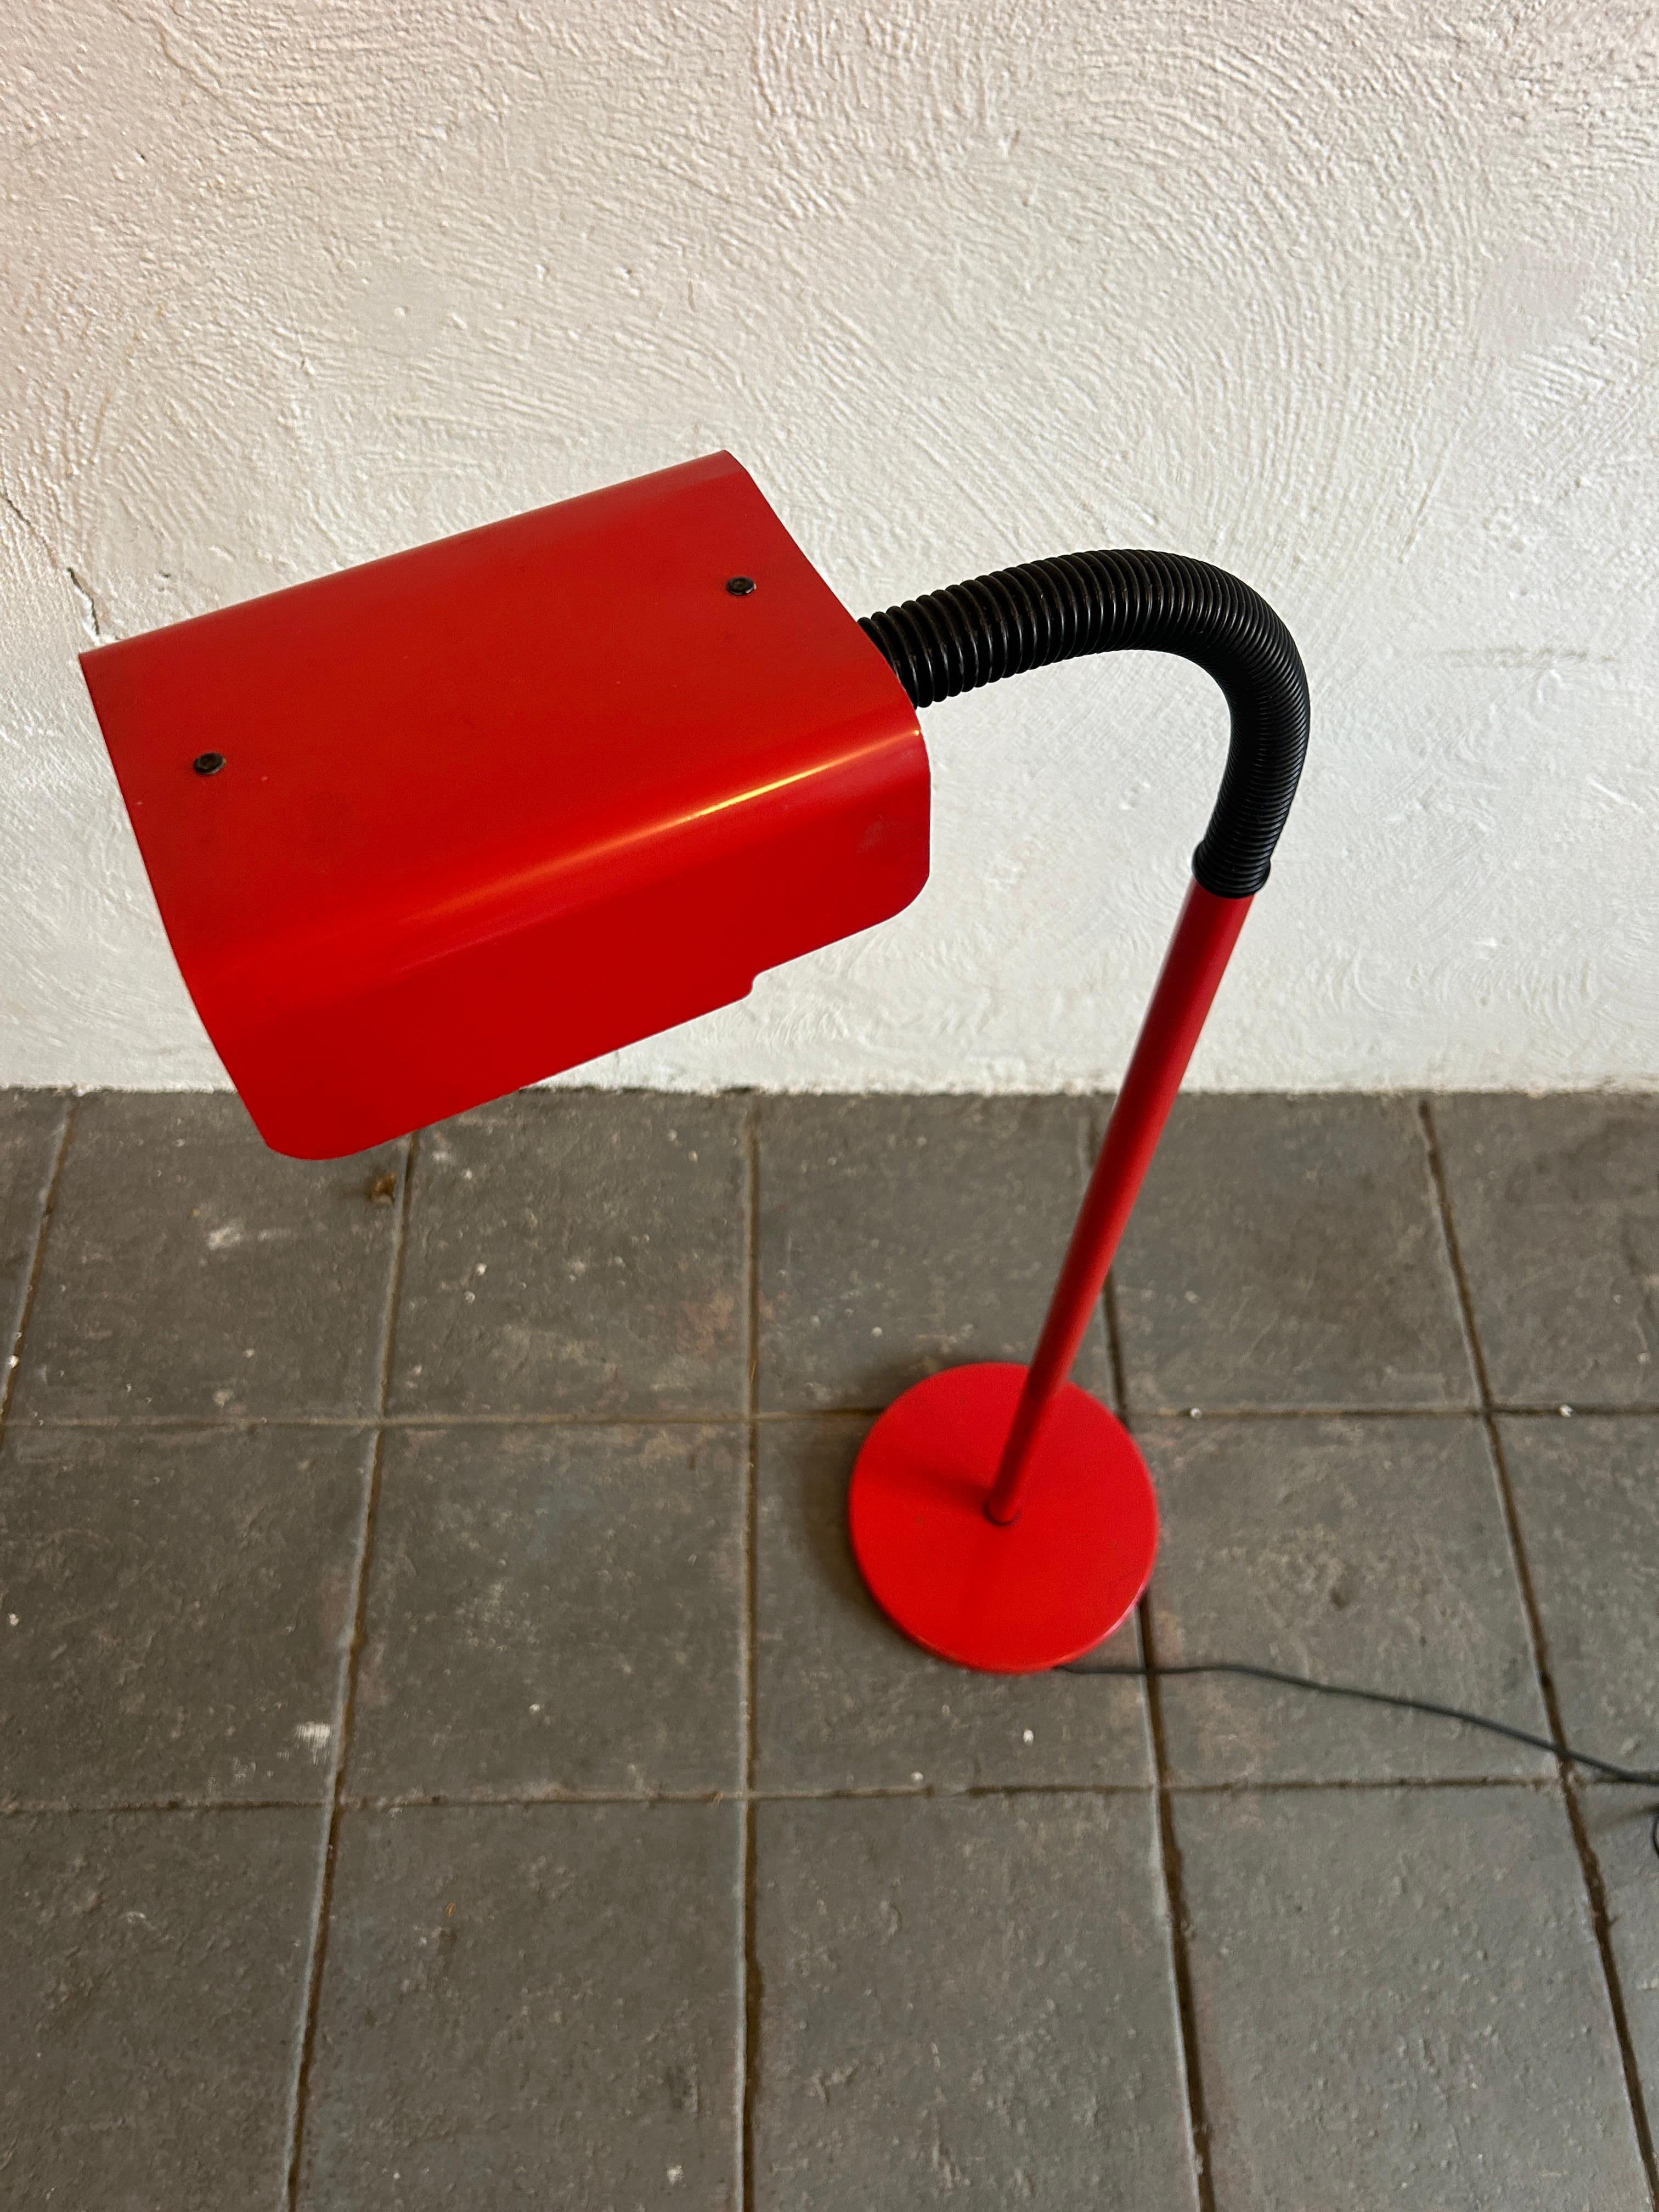 Post Modern Bright Red flexible neck floor lamp. Has turn knob switch Black cord and black plastic tube flexible neck. Fun floor Lamp has Metal base and shade. Takes (1) Standard light bulb. works 100%.

Height is adjustable.